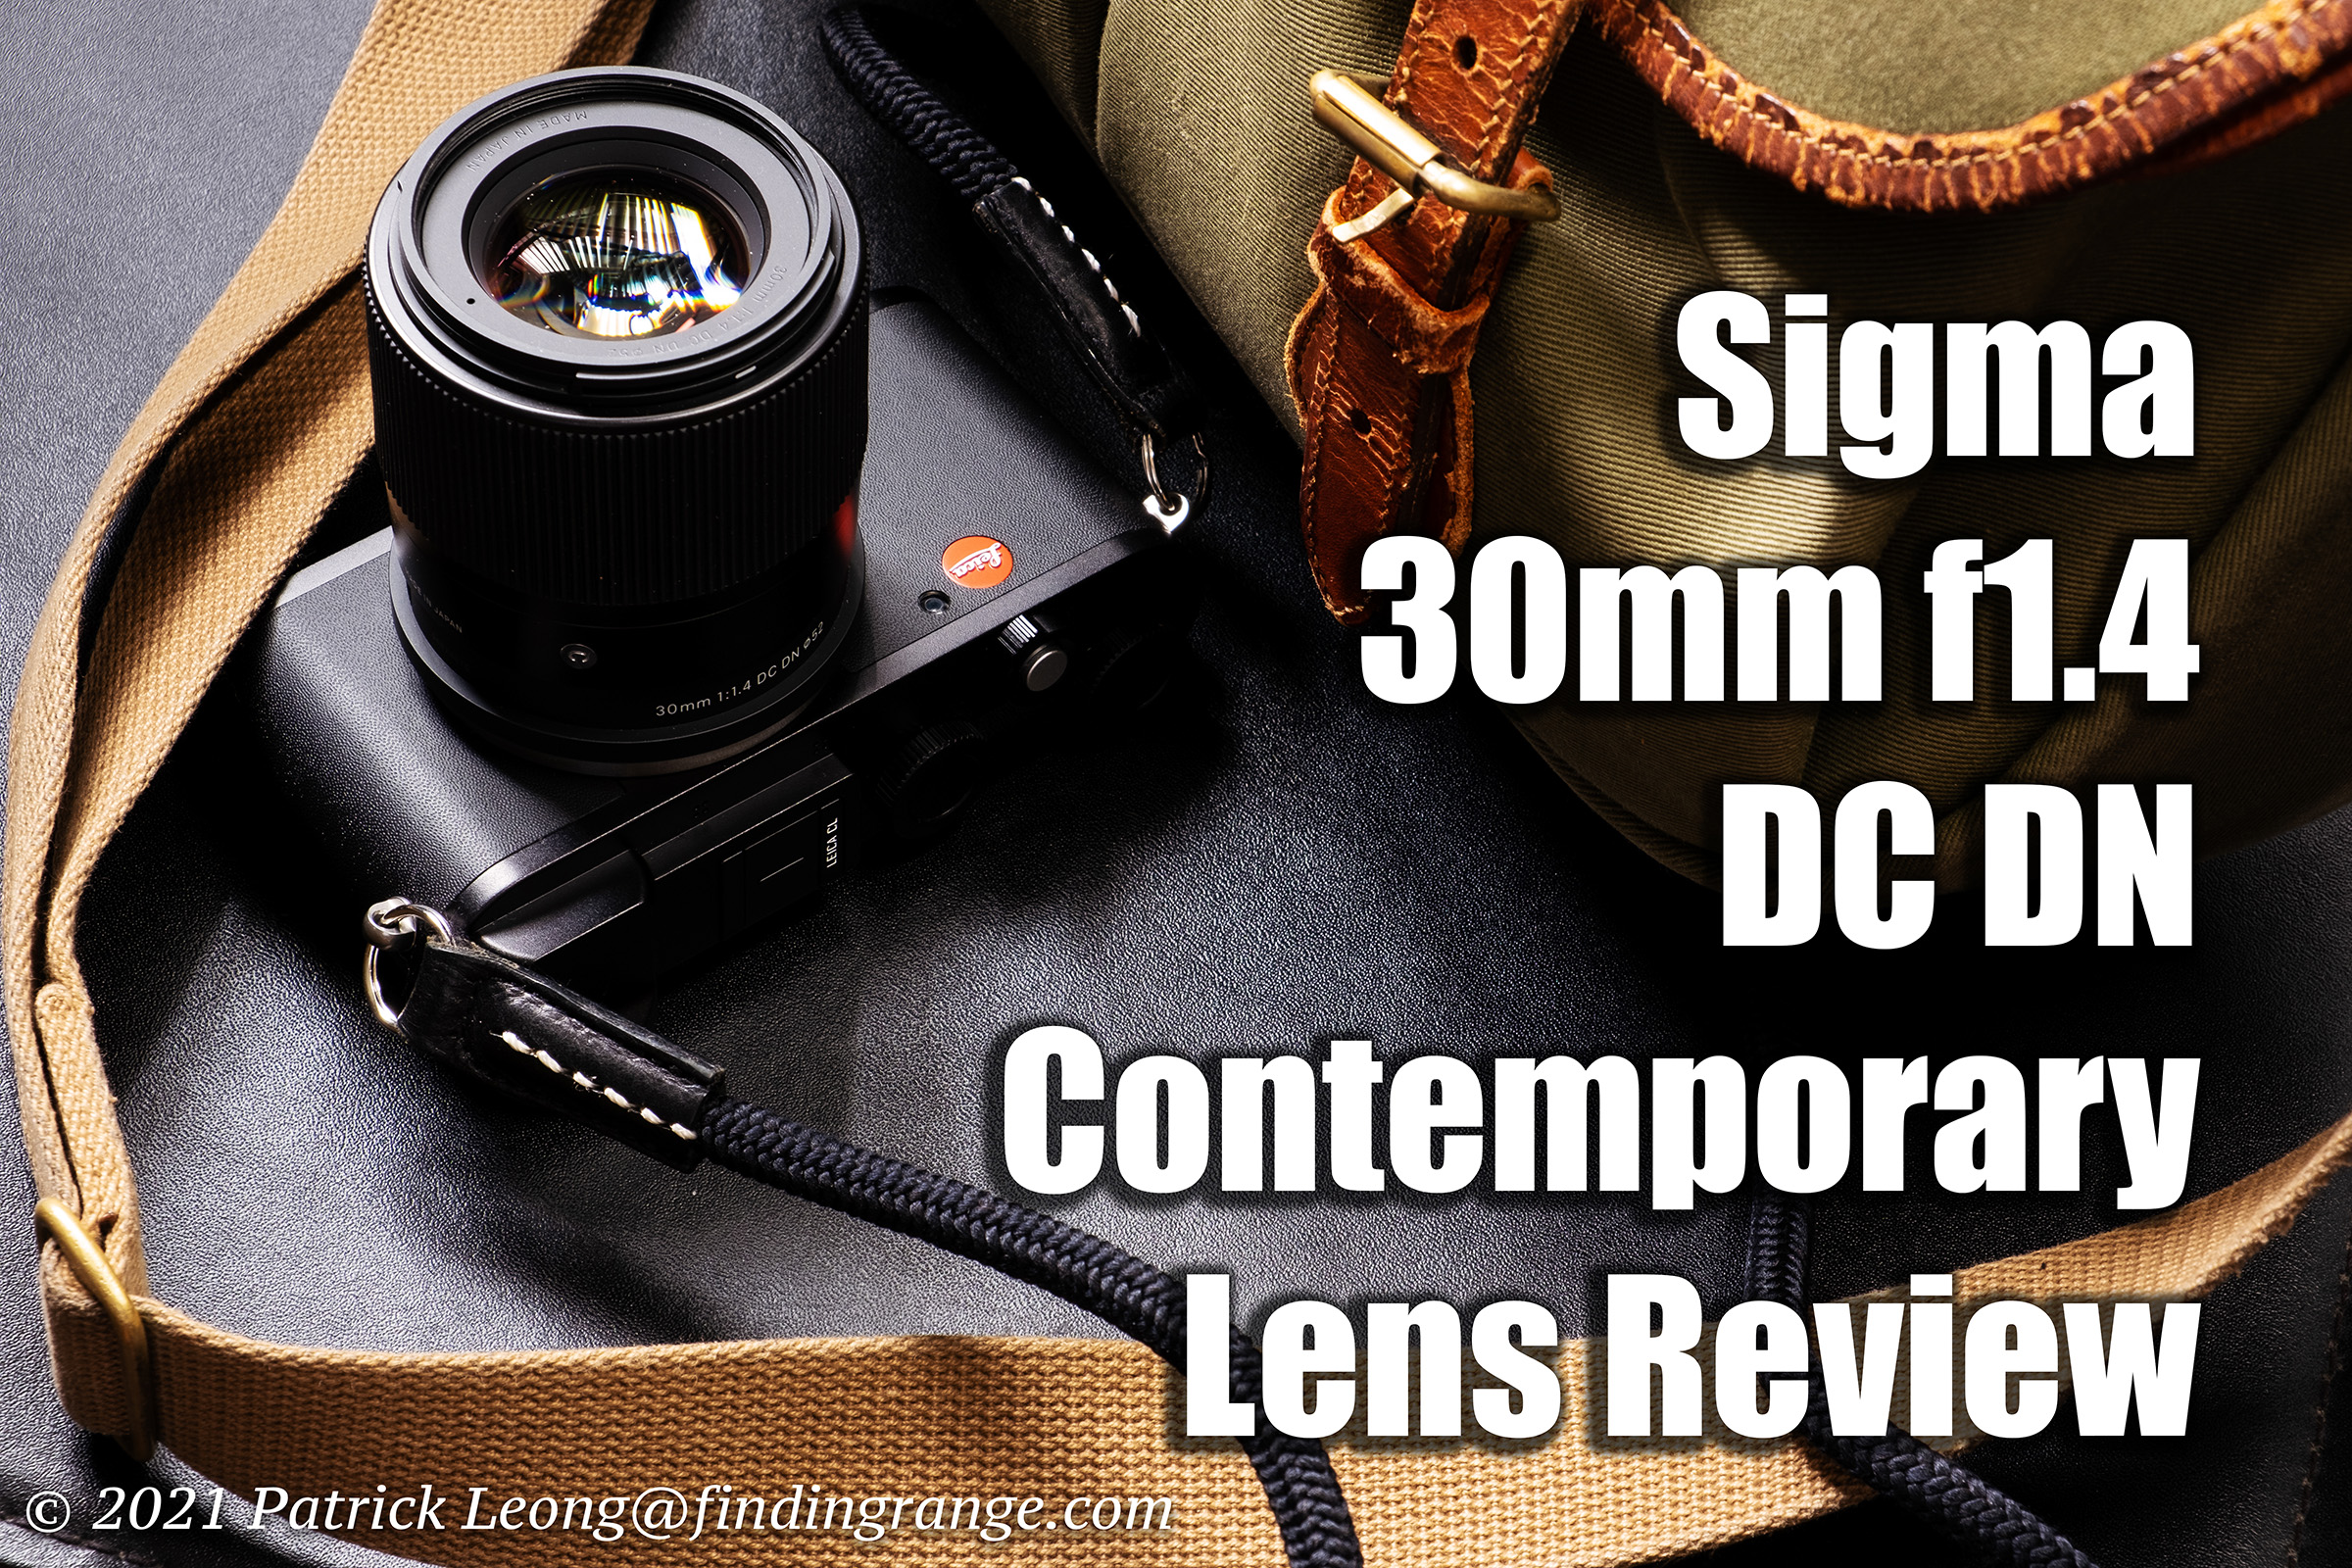 Sigma 30mm f1.4 DC DN Contemporary Lens Review - Finding Range